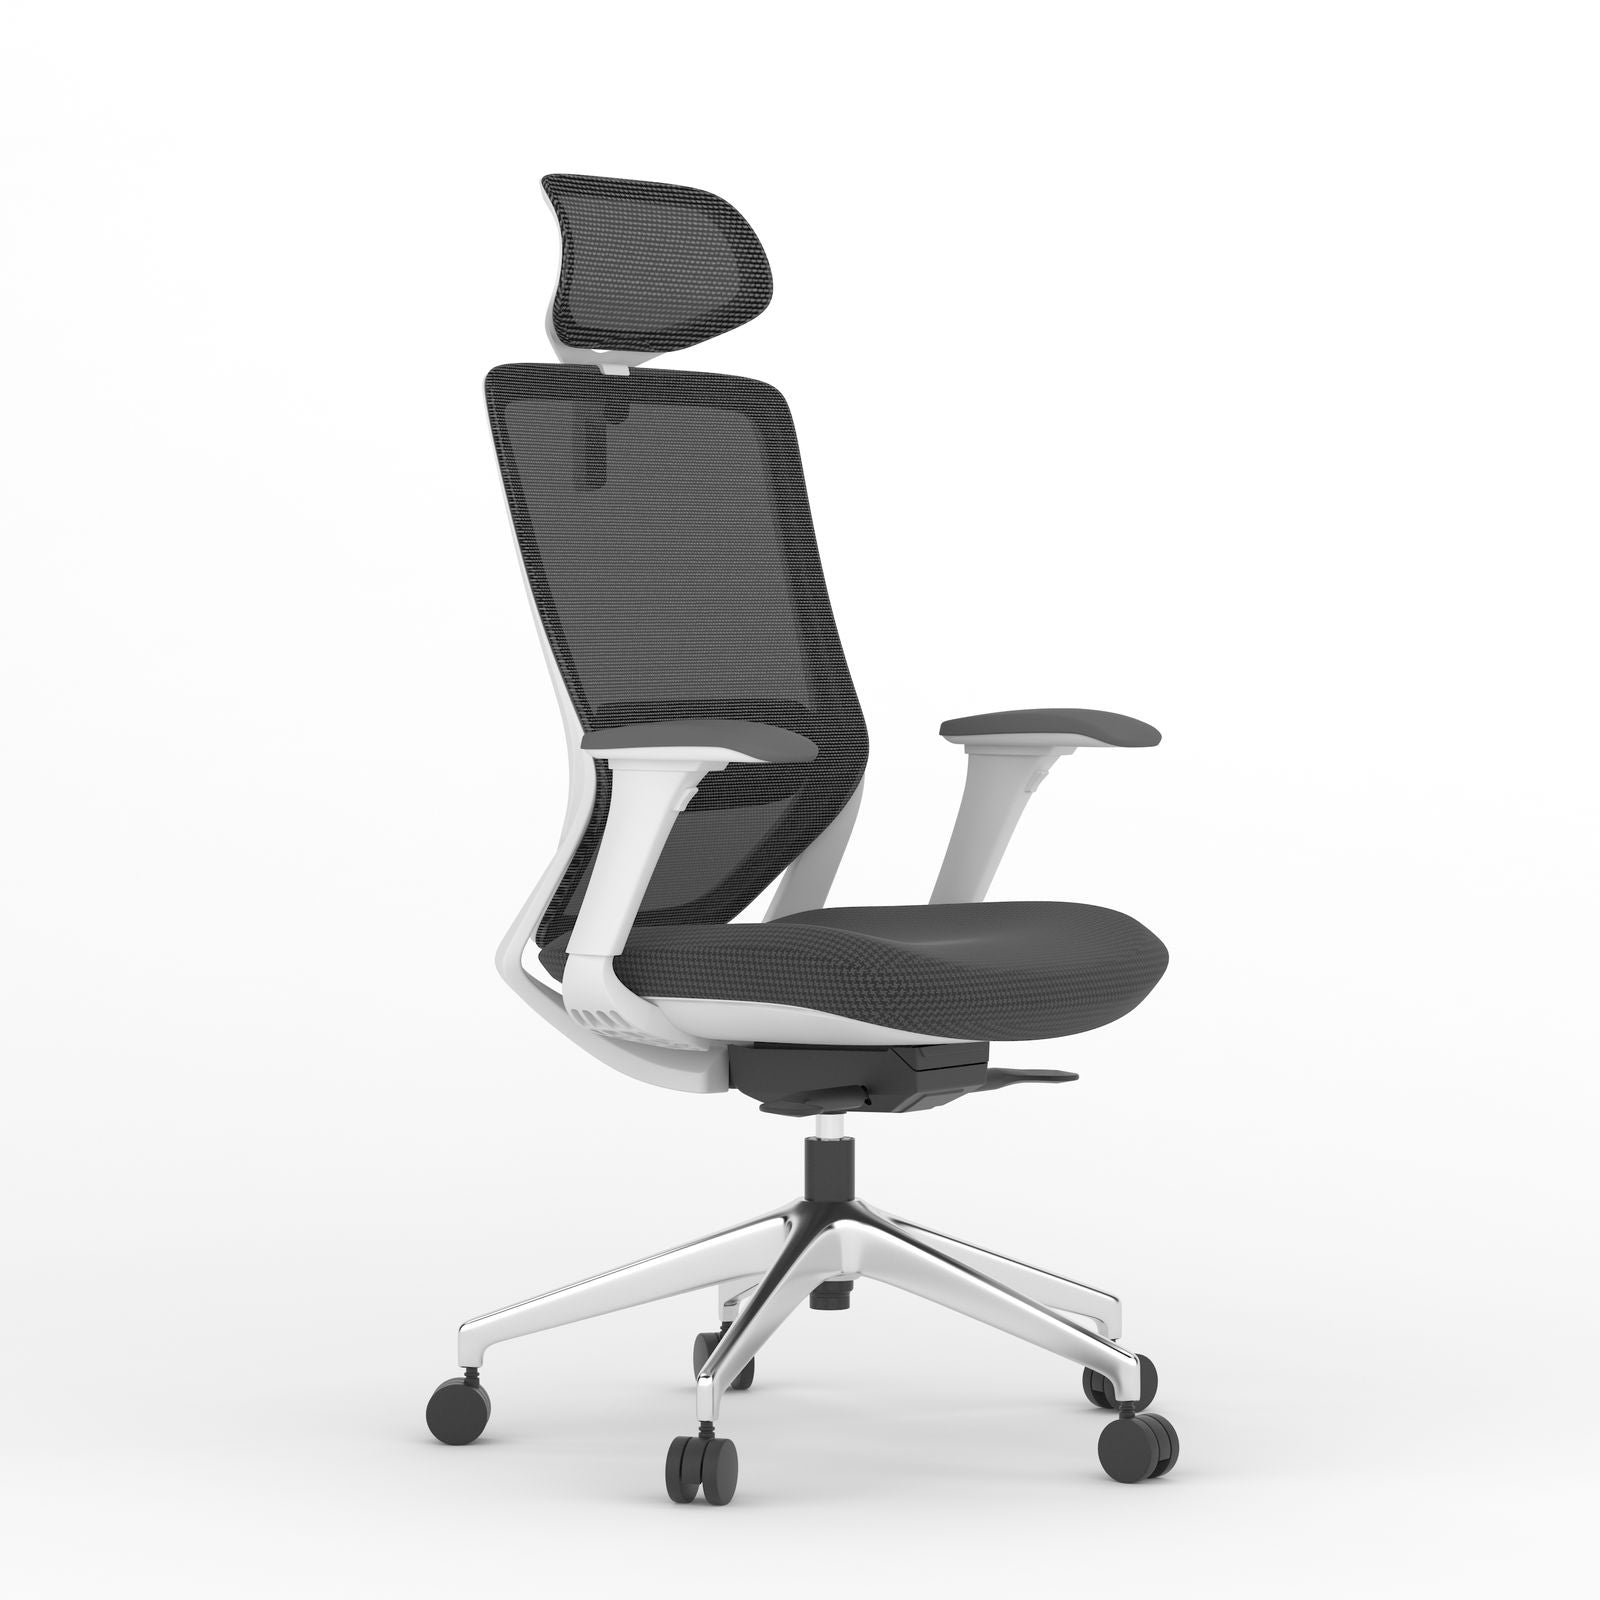 Boston High Back Ergonomic Office Chair With Cushion Seat, 4D Armrest And Aluminum Base with Nylon Castors- Grey